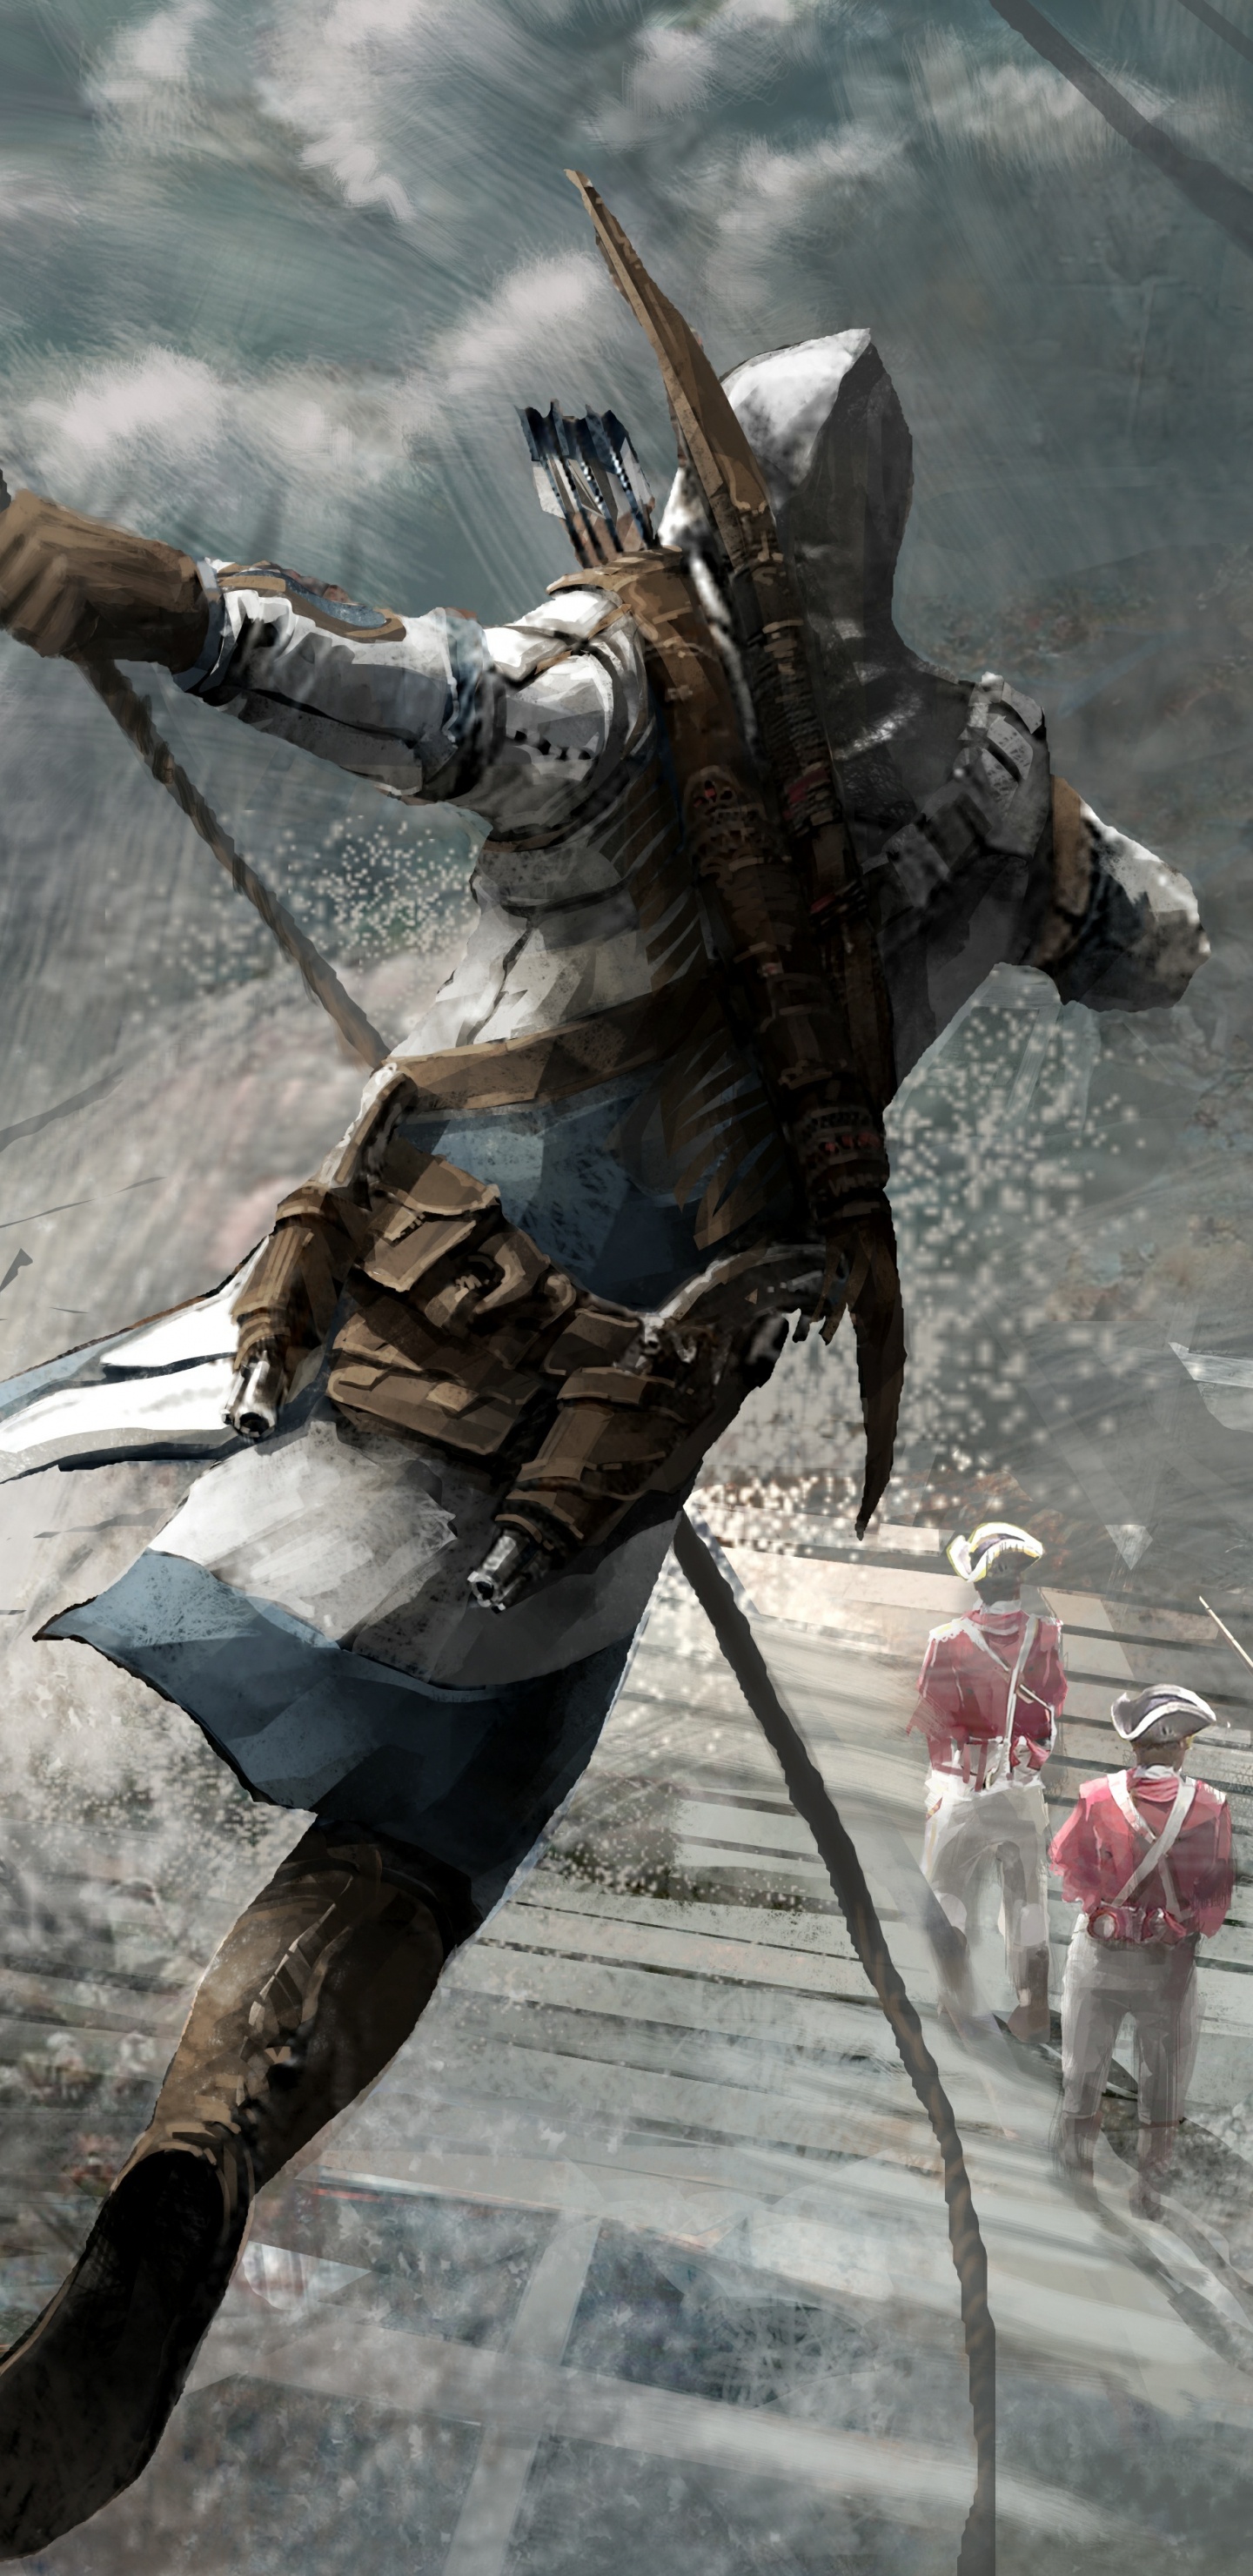 Assassins Creed III, Assassins Creed, Ezio Auditore, Connor Kenway, Ubisoft. Wallpaper in 1440x2960 Resolution